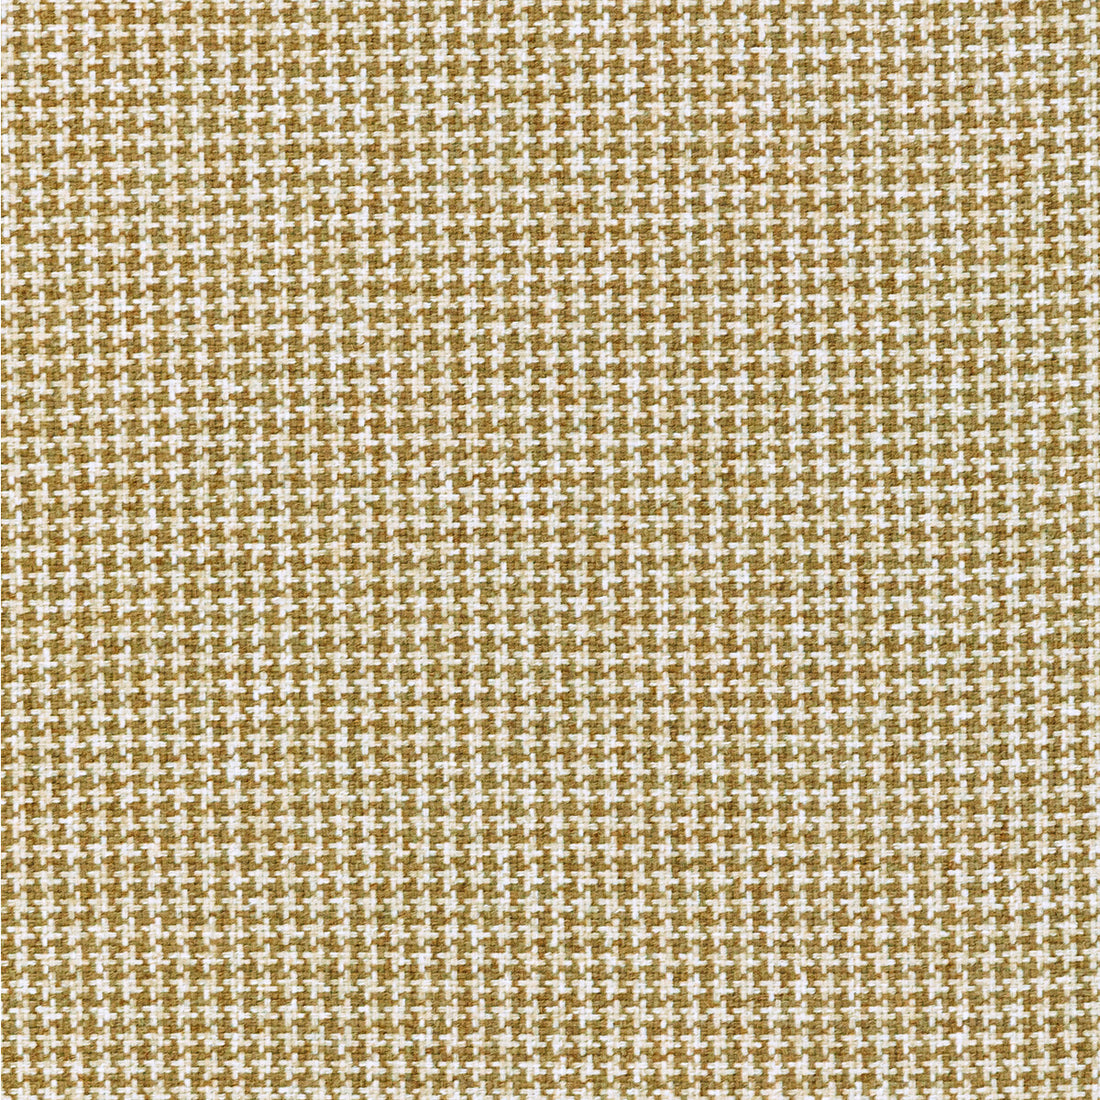 Steamboat fabric in cognac color - pattern 36258.4.0 - by Kravet Contract in the Supreen collection